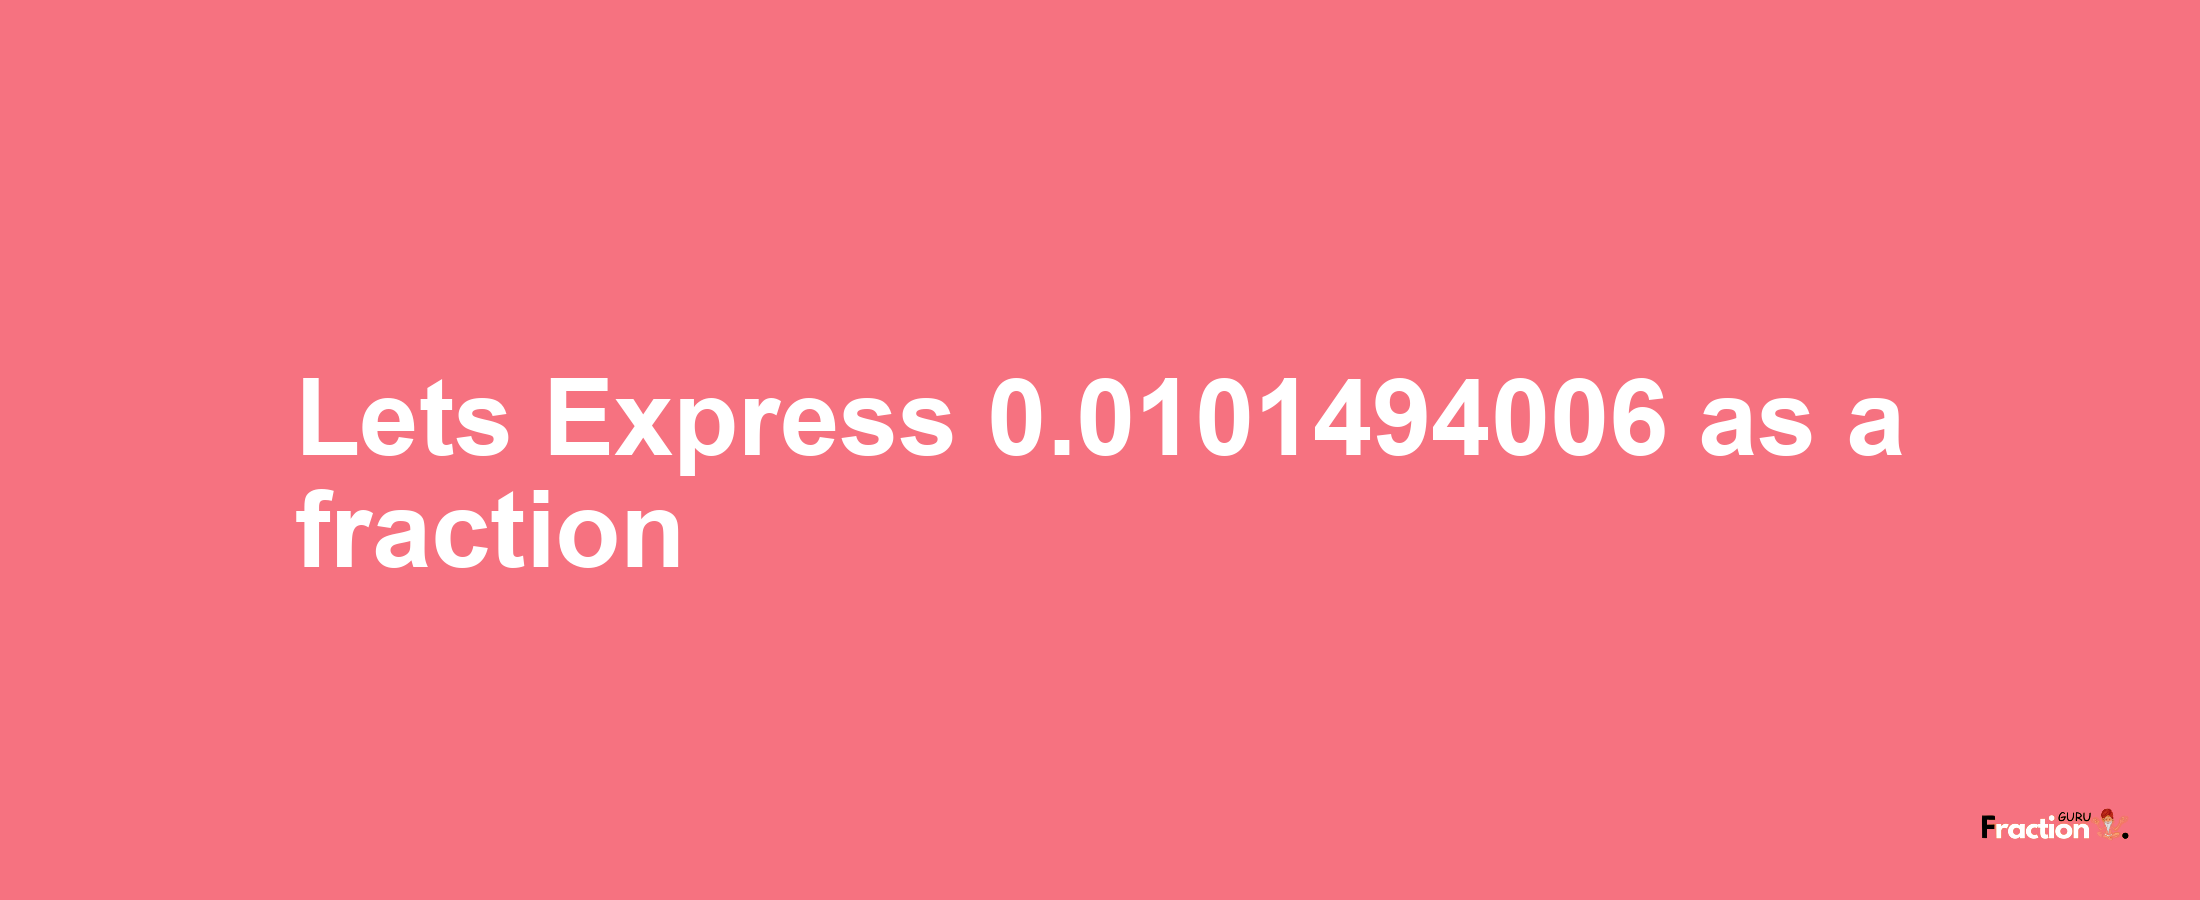 Lets Express 0.0101494006 as afraction